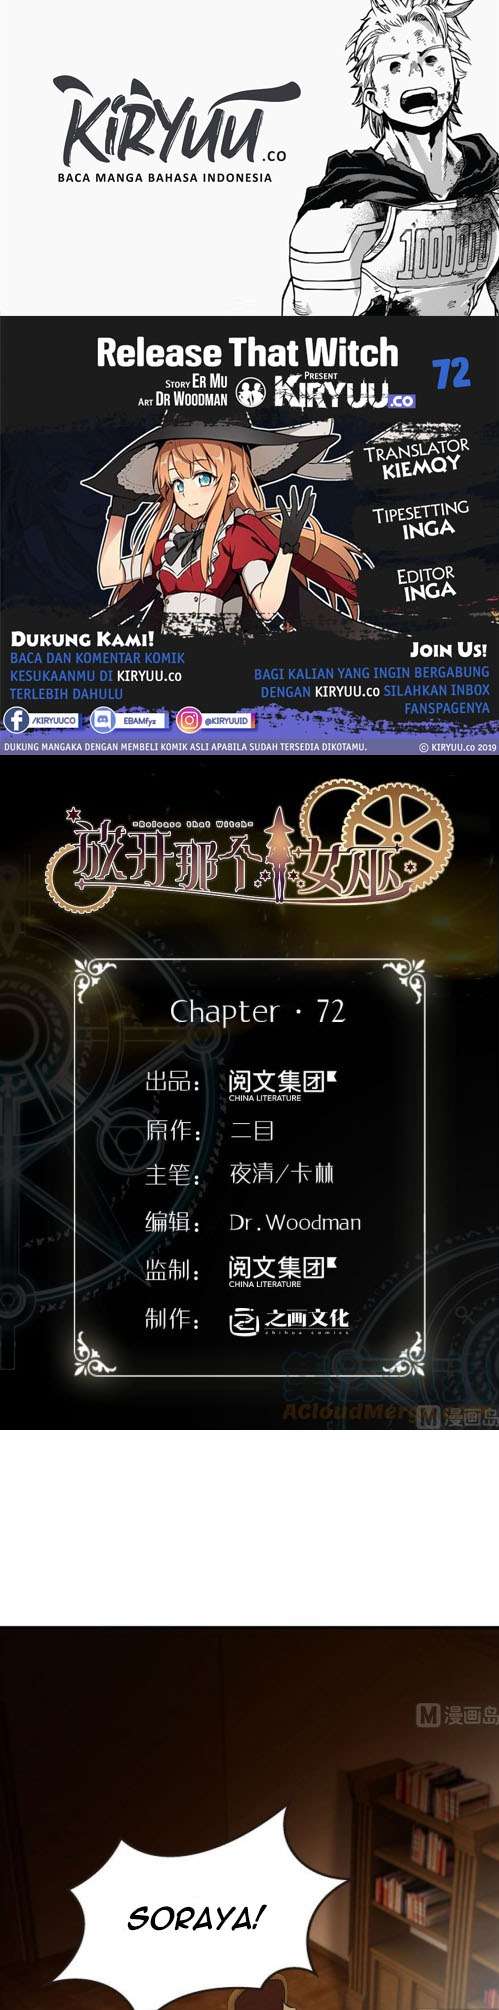 Release That Witch Chapter 72 1